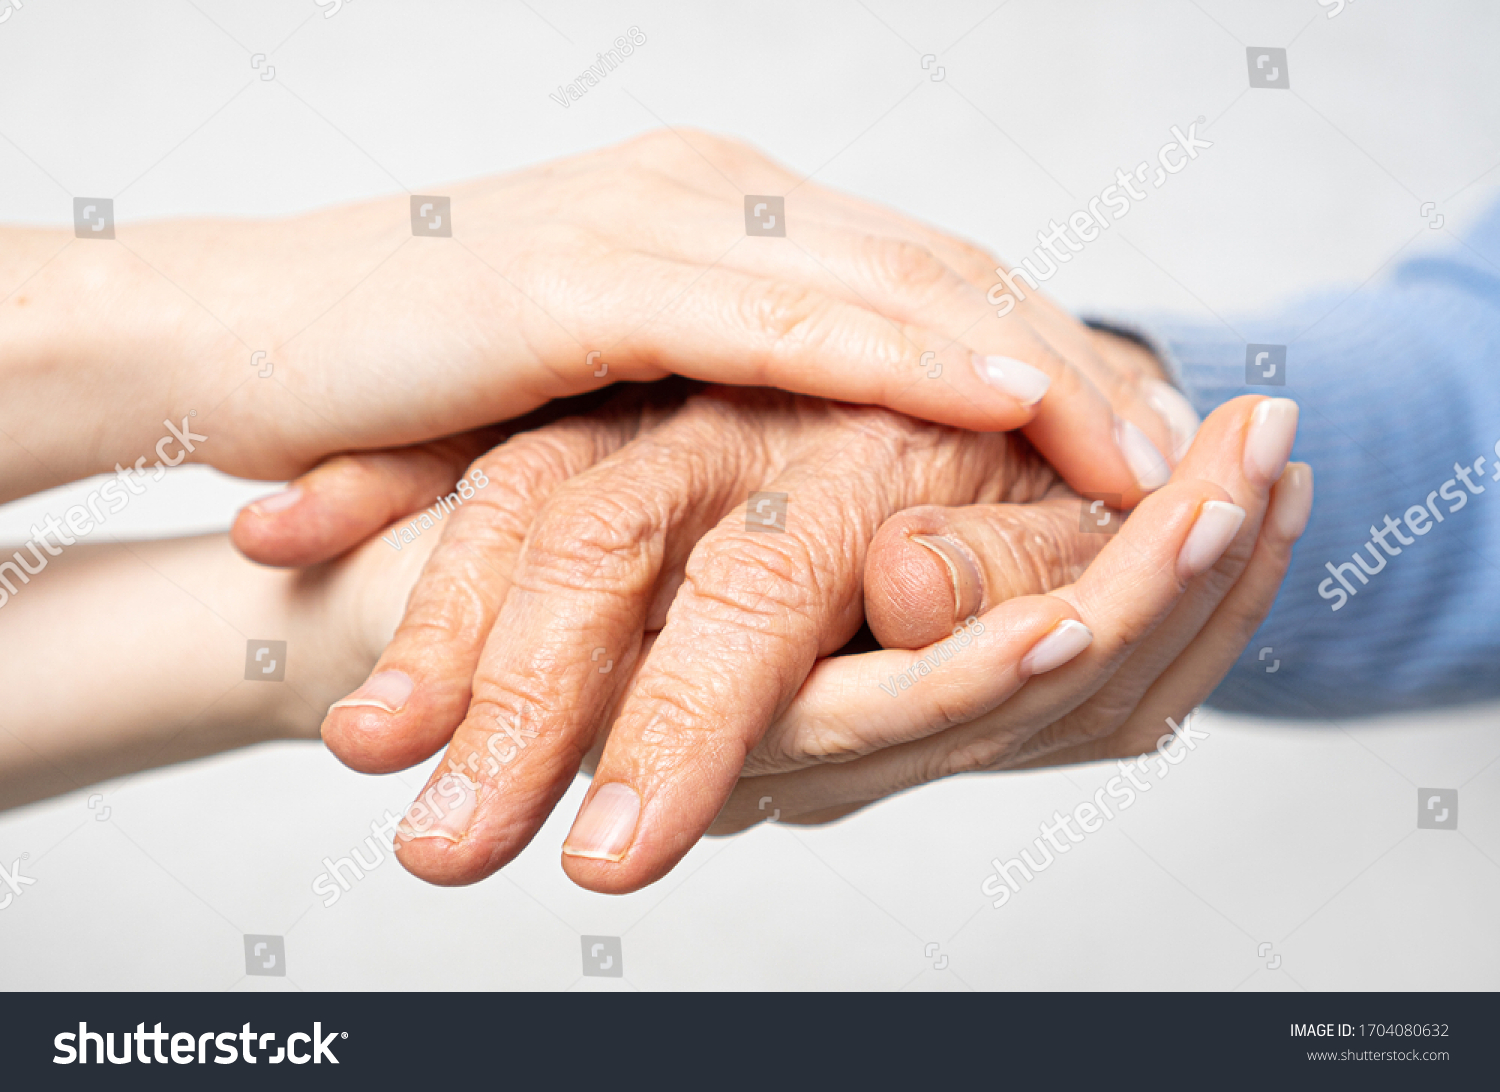 Young hands hold old hands. Support for the elderly concept.  #1704080632